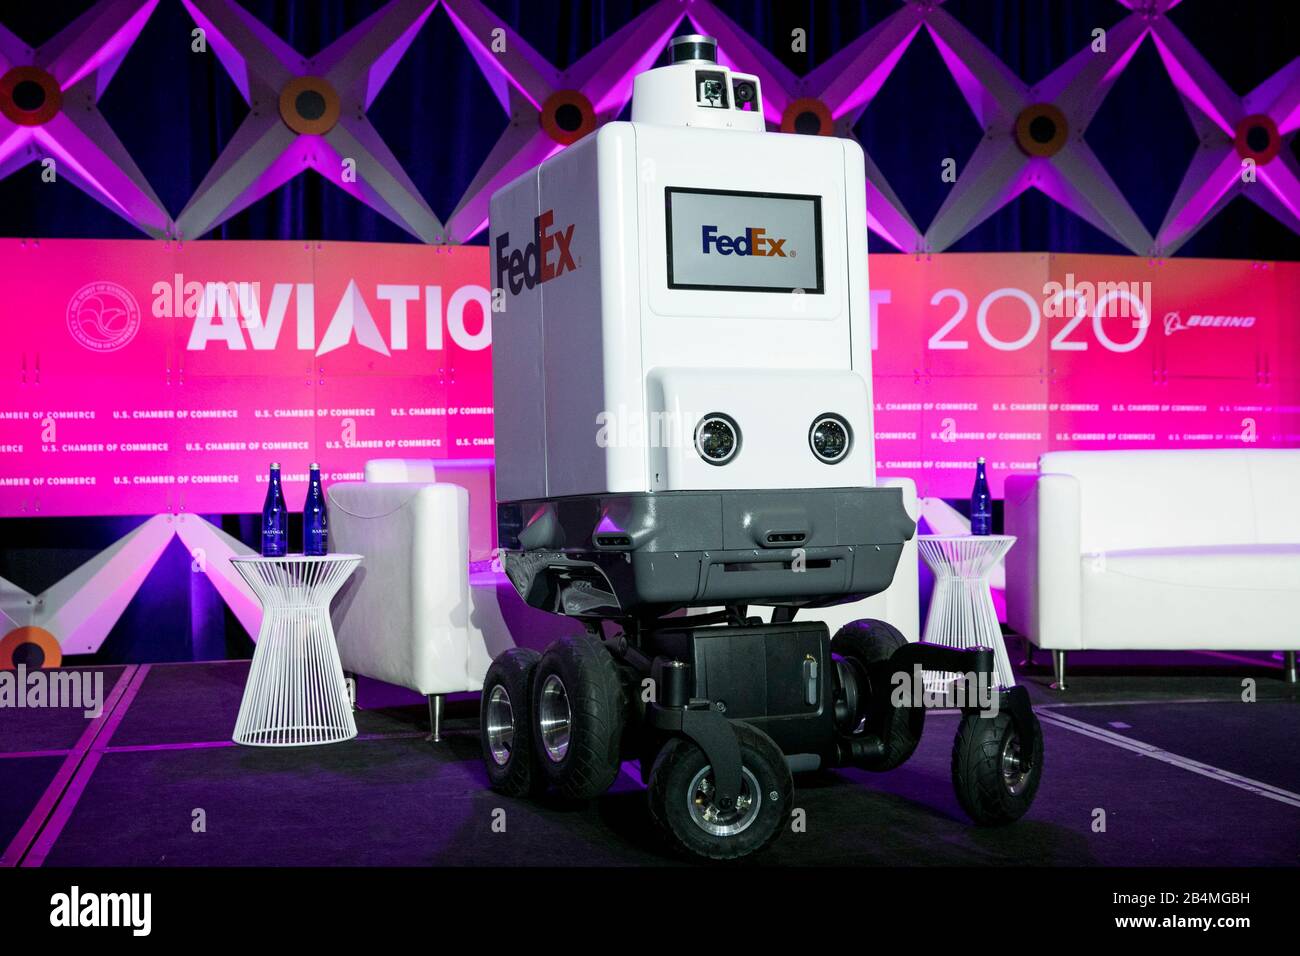 A FedEx Roxo SameDay Delivery Bot on display at the U.S. Chamber of Commerce Aviation Summit in Washington, D.C. on March 5, 2020. Stock Photo